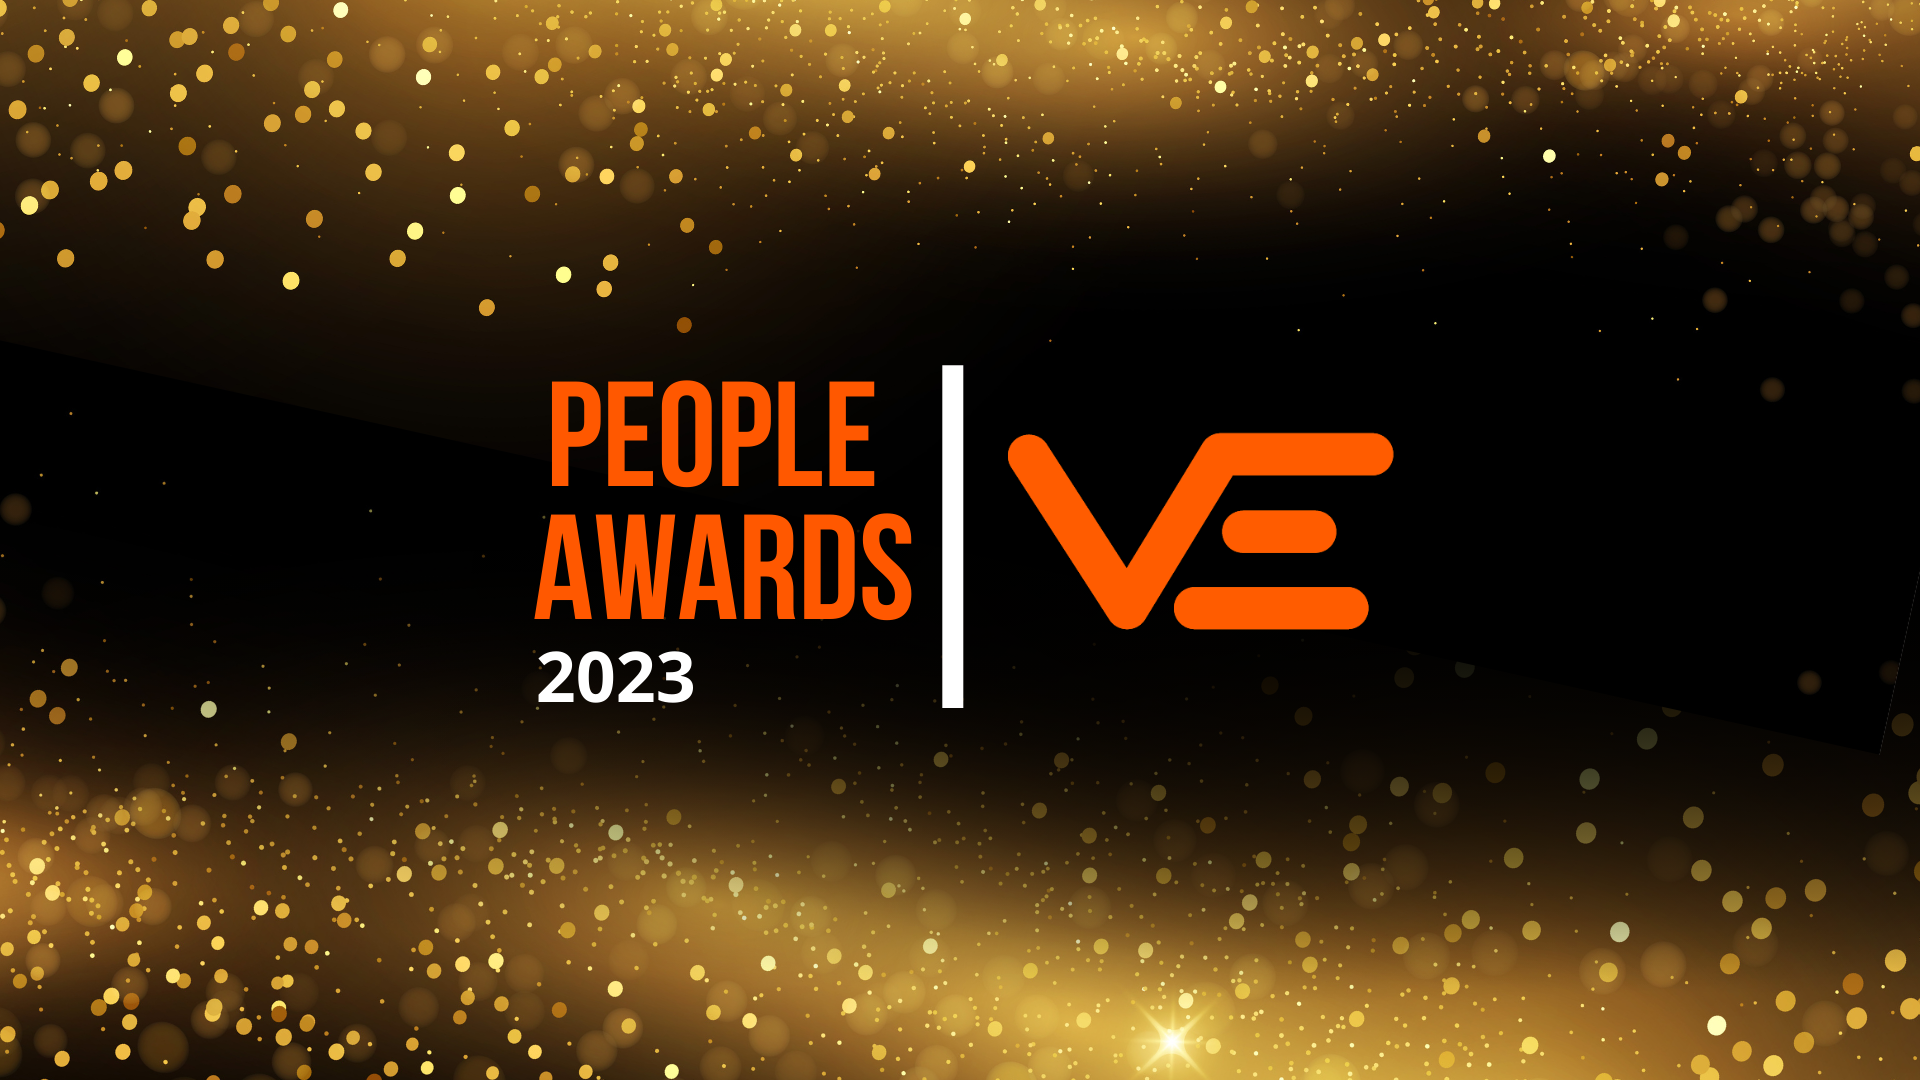 Celebrating our People: 2023 Award winners